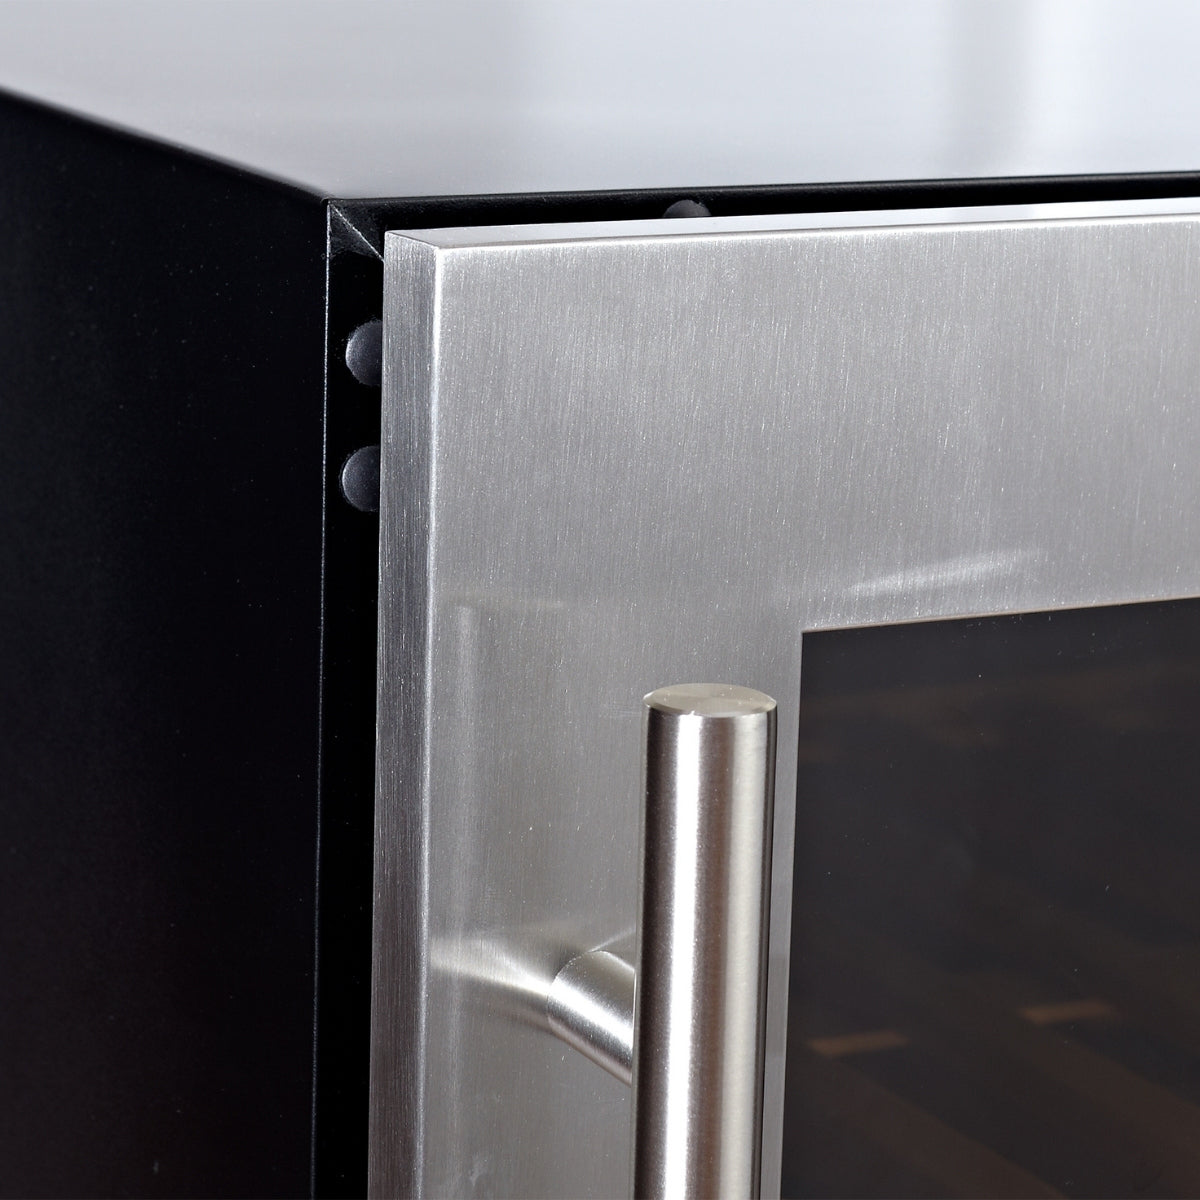 A black and silver cabinet with a glass door, featuring a sleek and modern design.